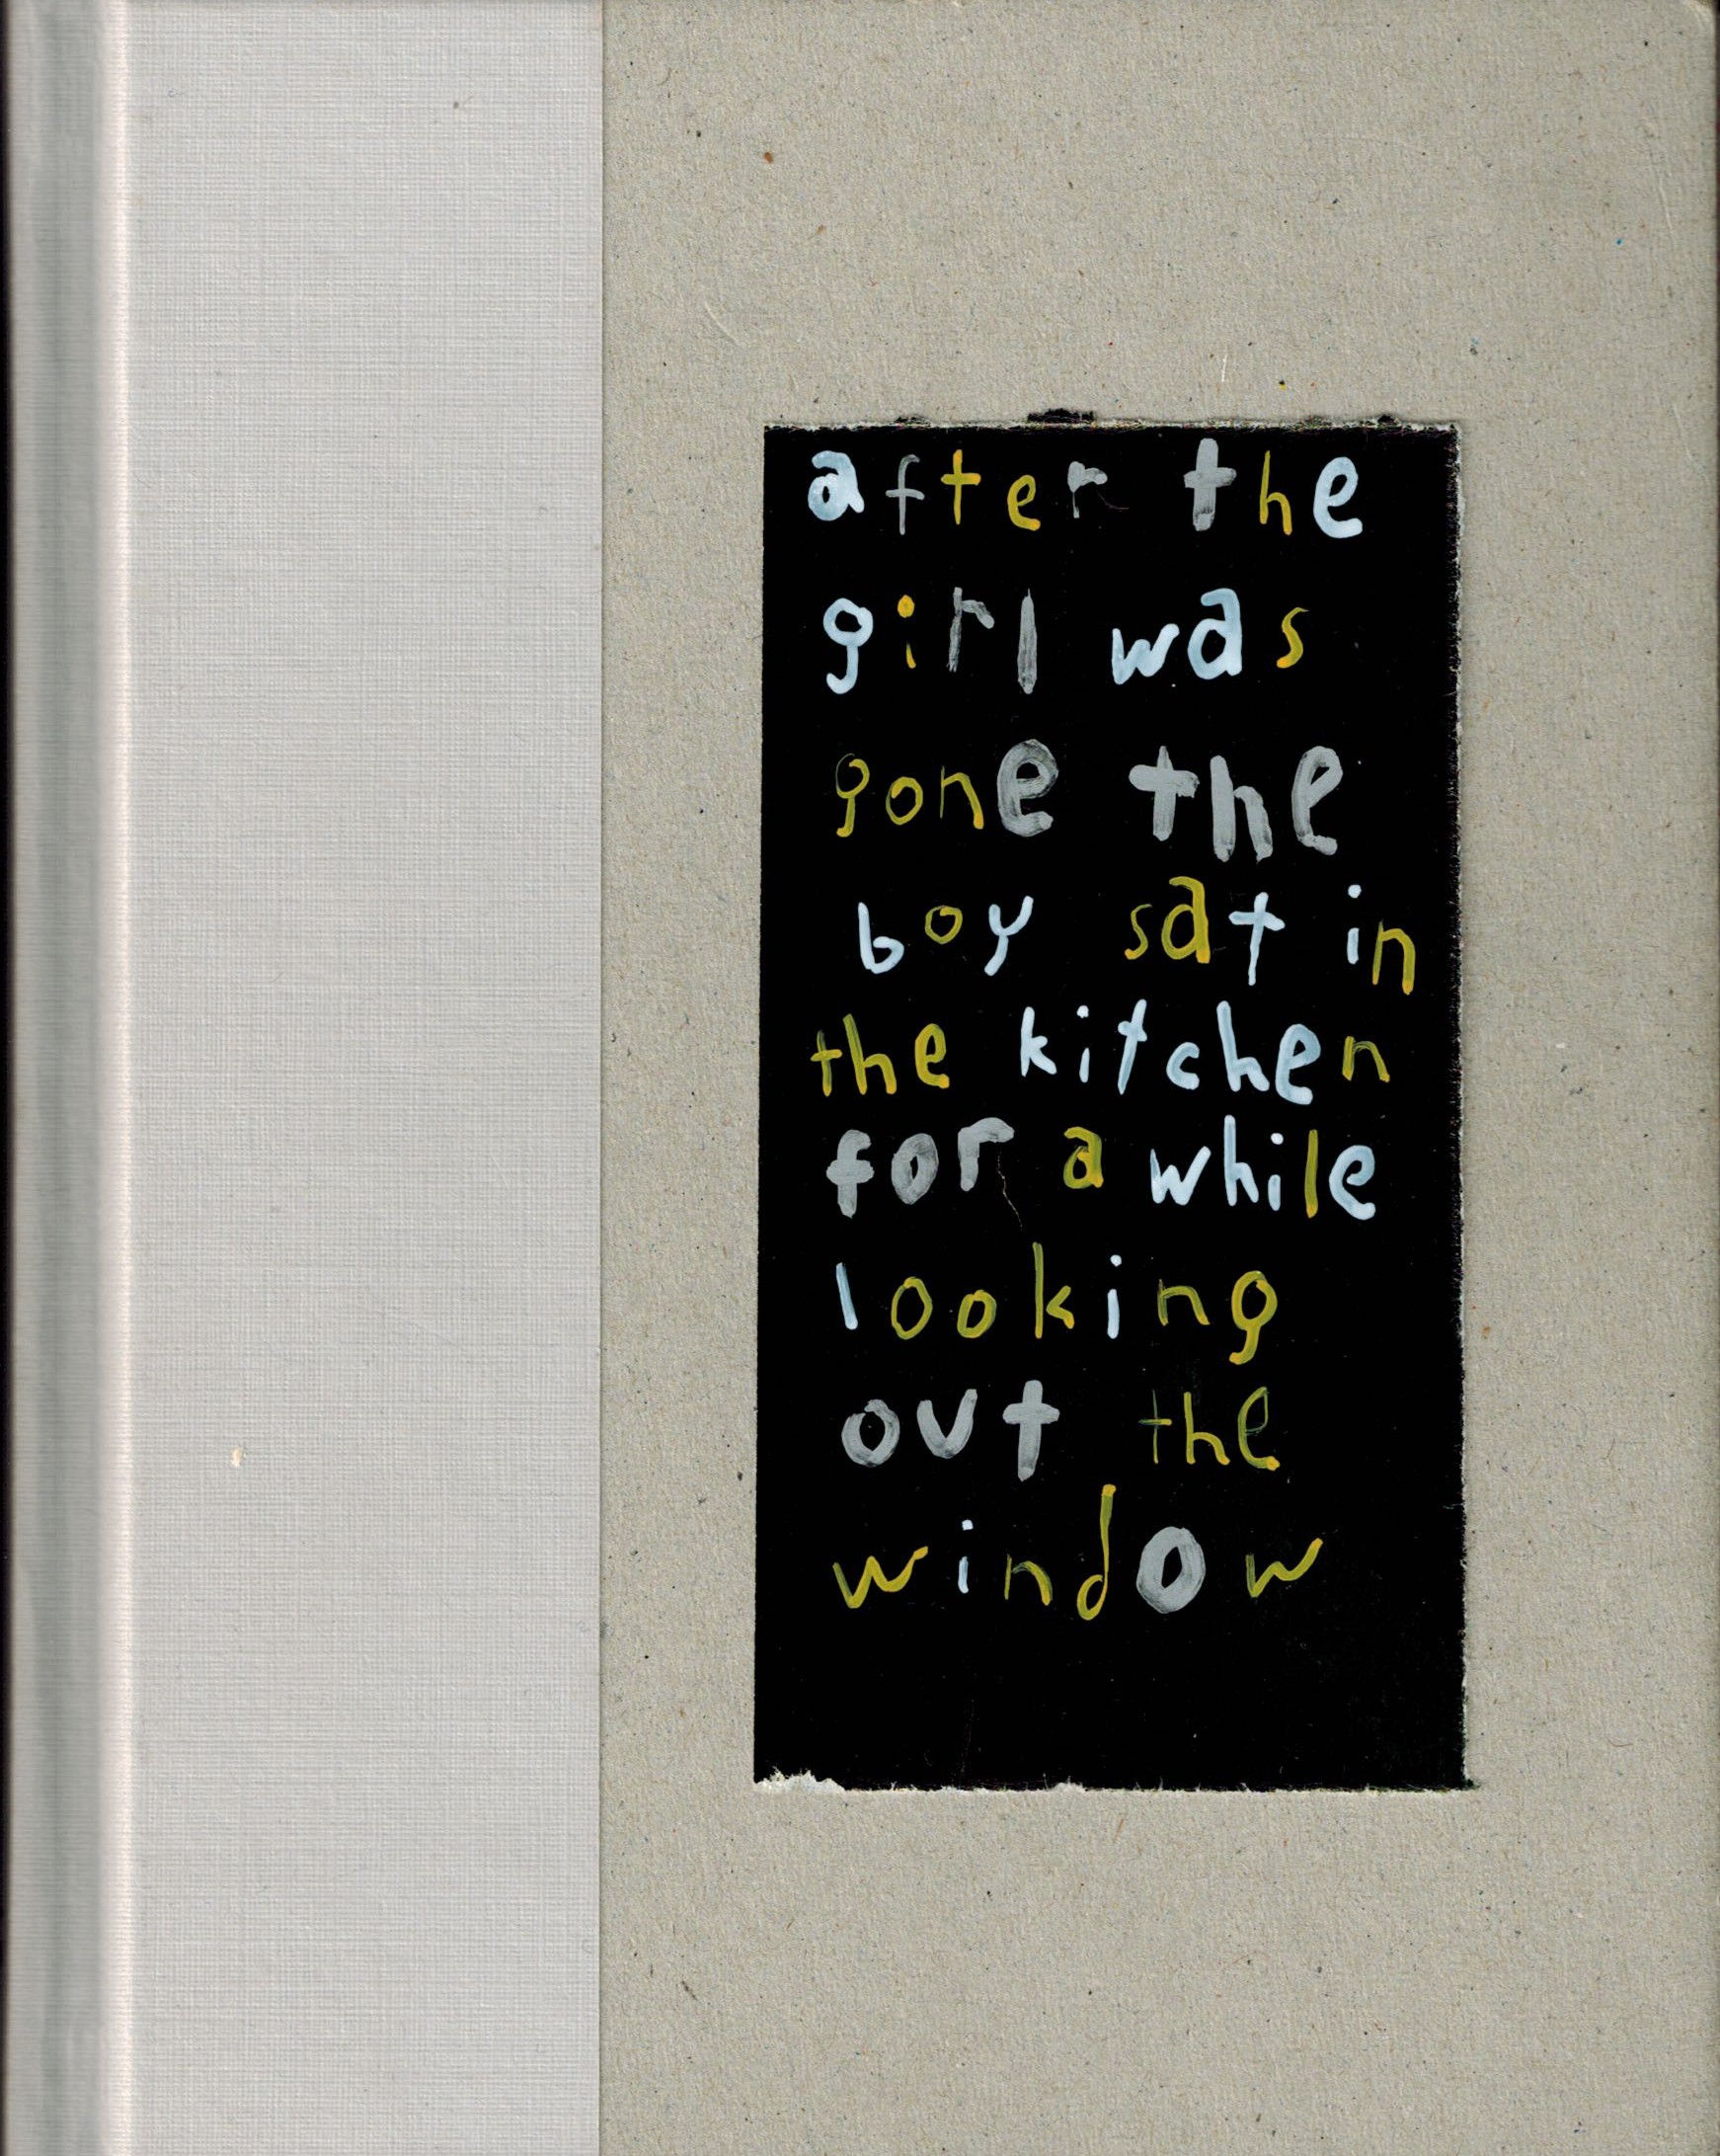 cover art of after the girl was gone